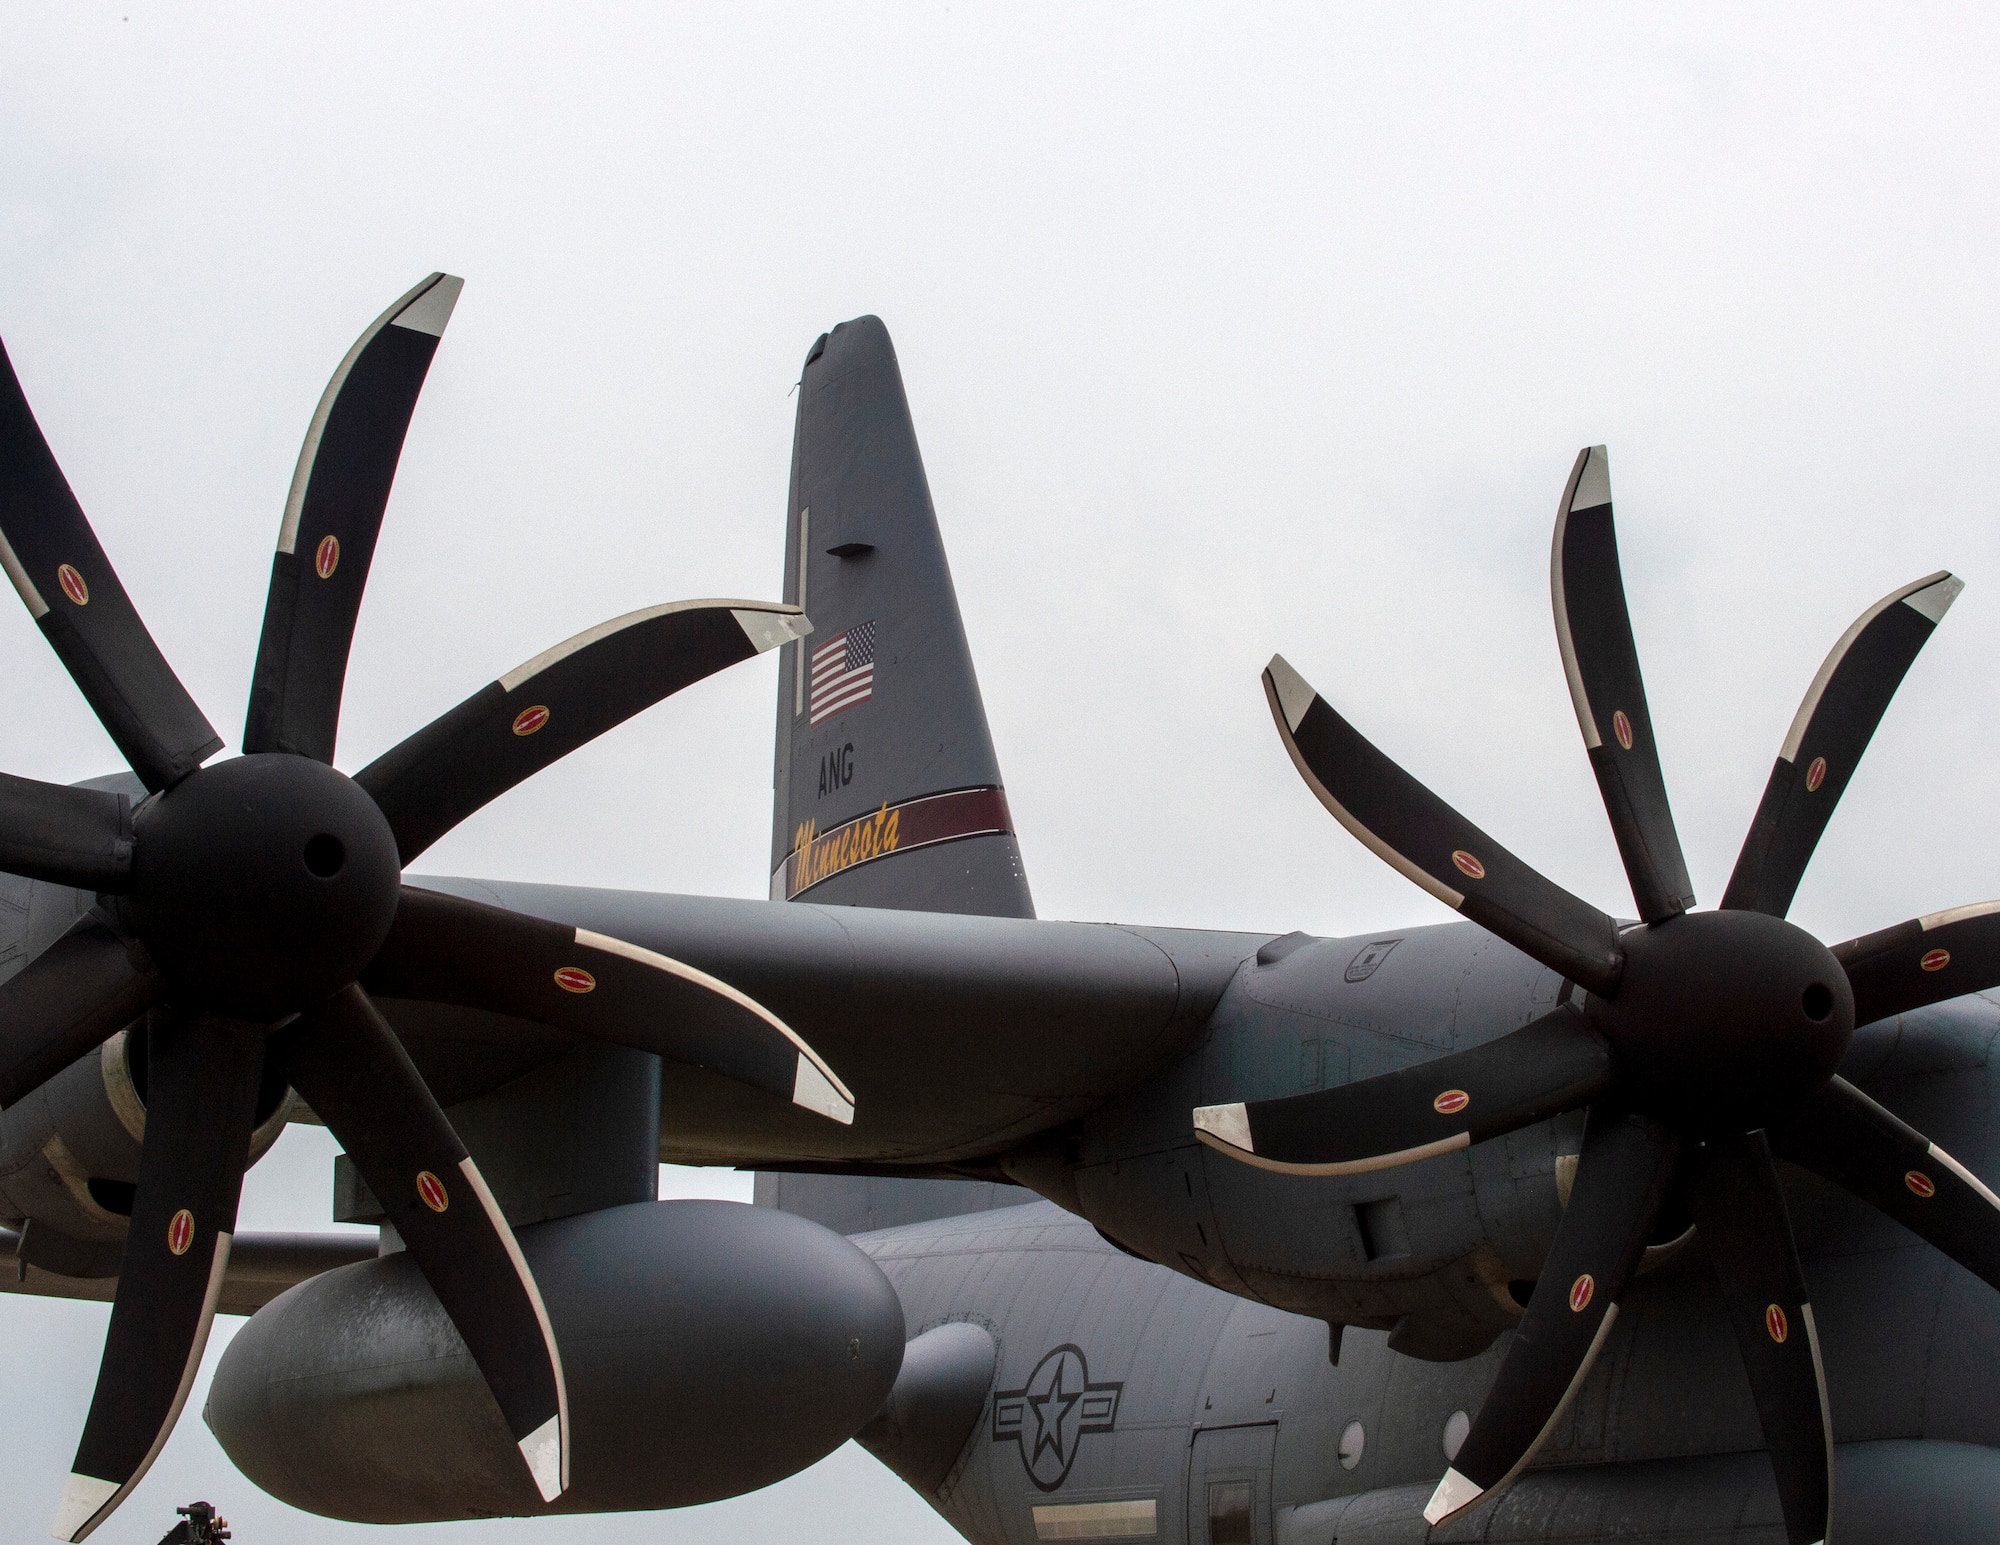 A C-130 Hercules from the 133rd Airlift Wing is parked on the flight line in St. Paul, Minn., May 11, 2022.